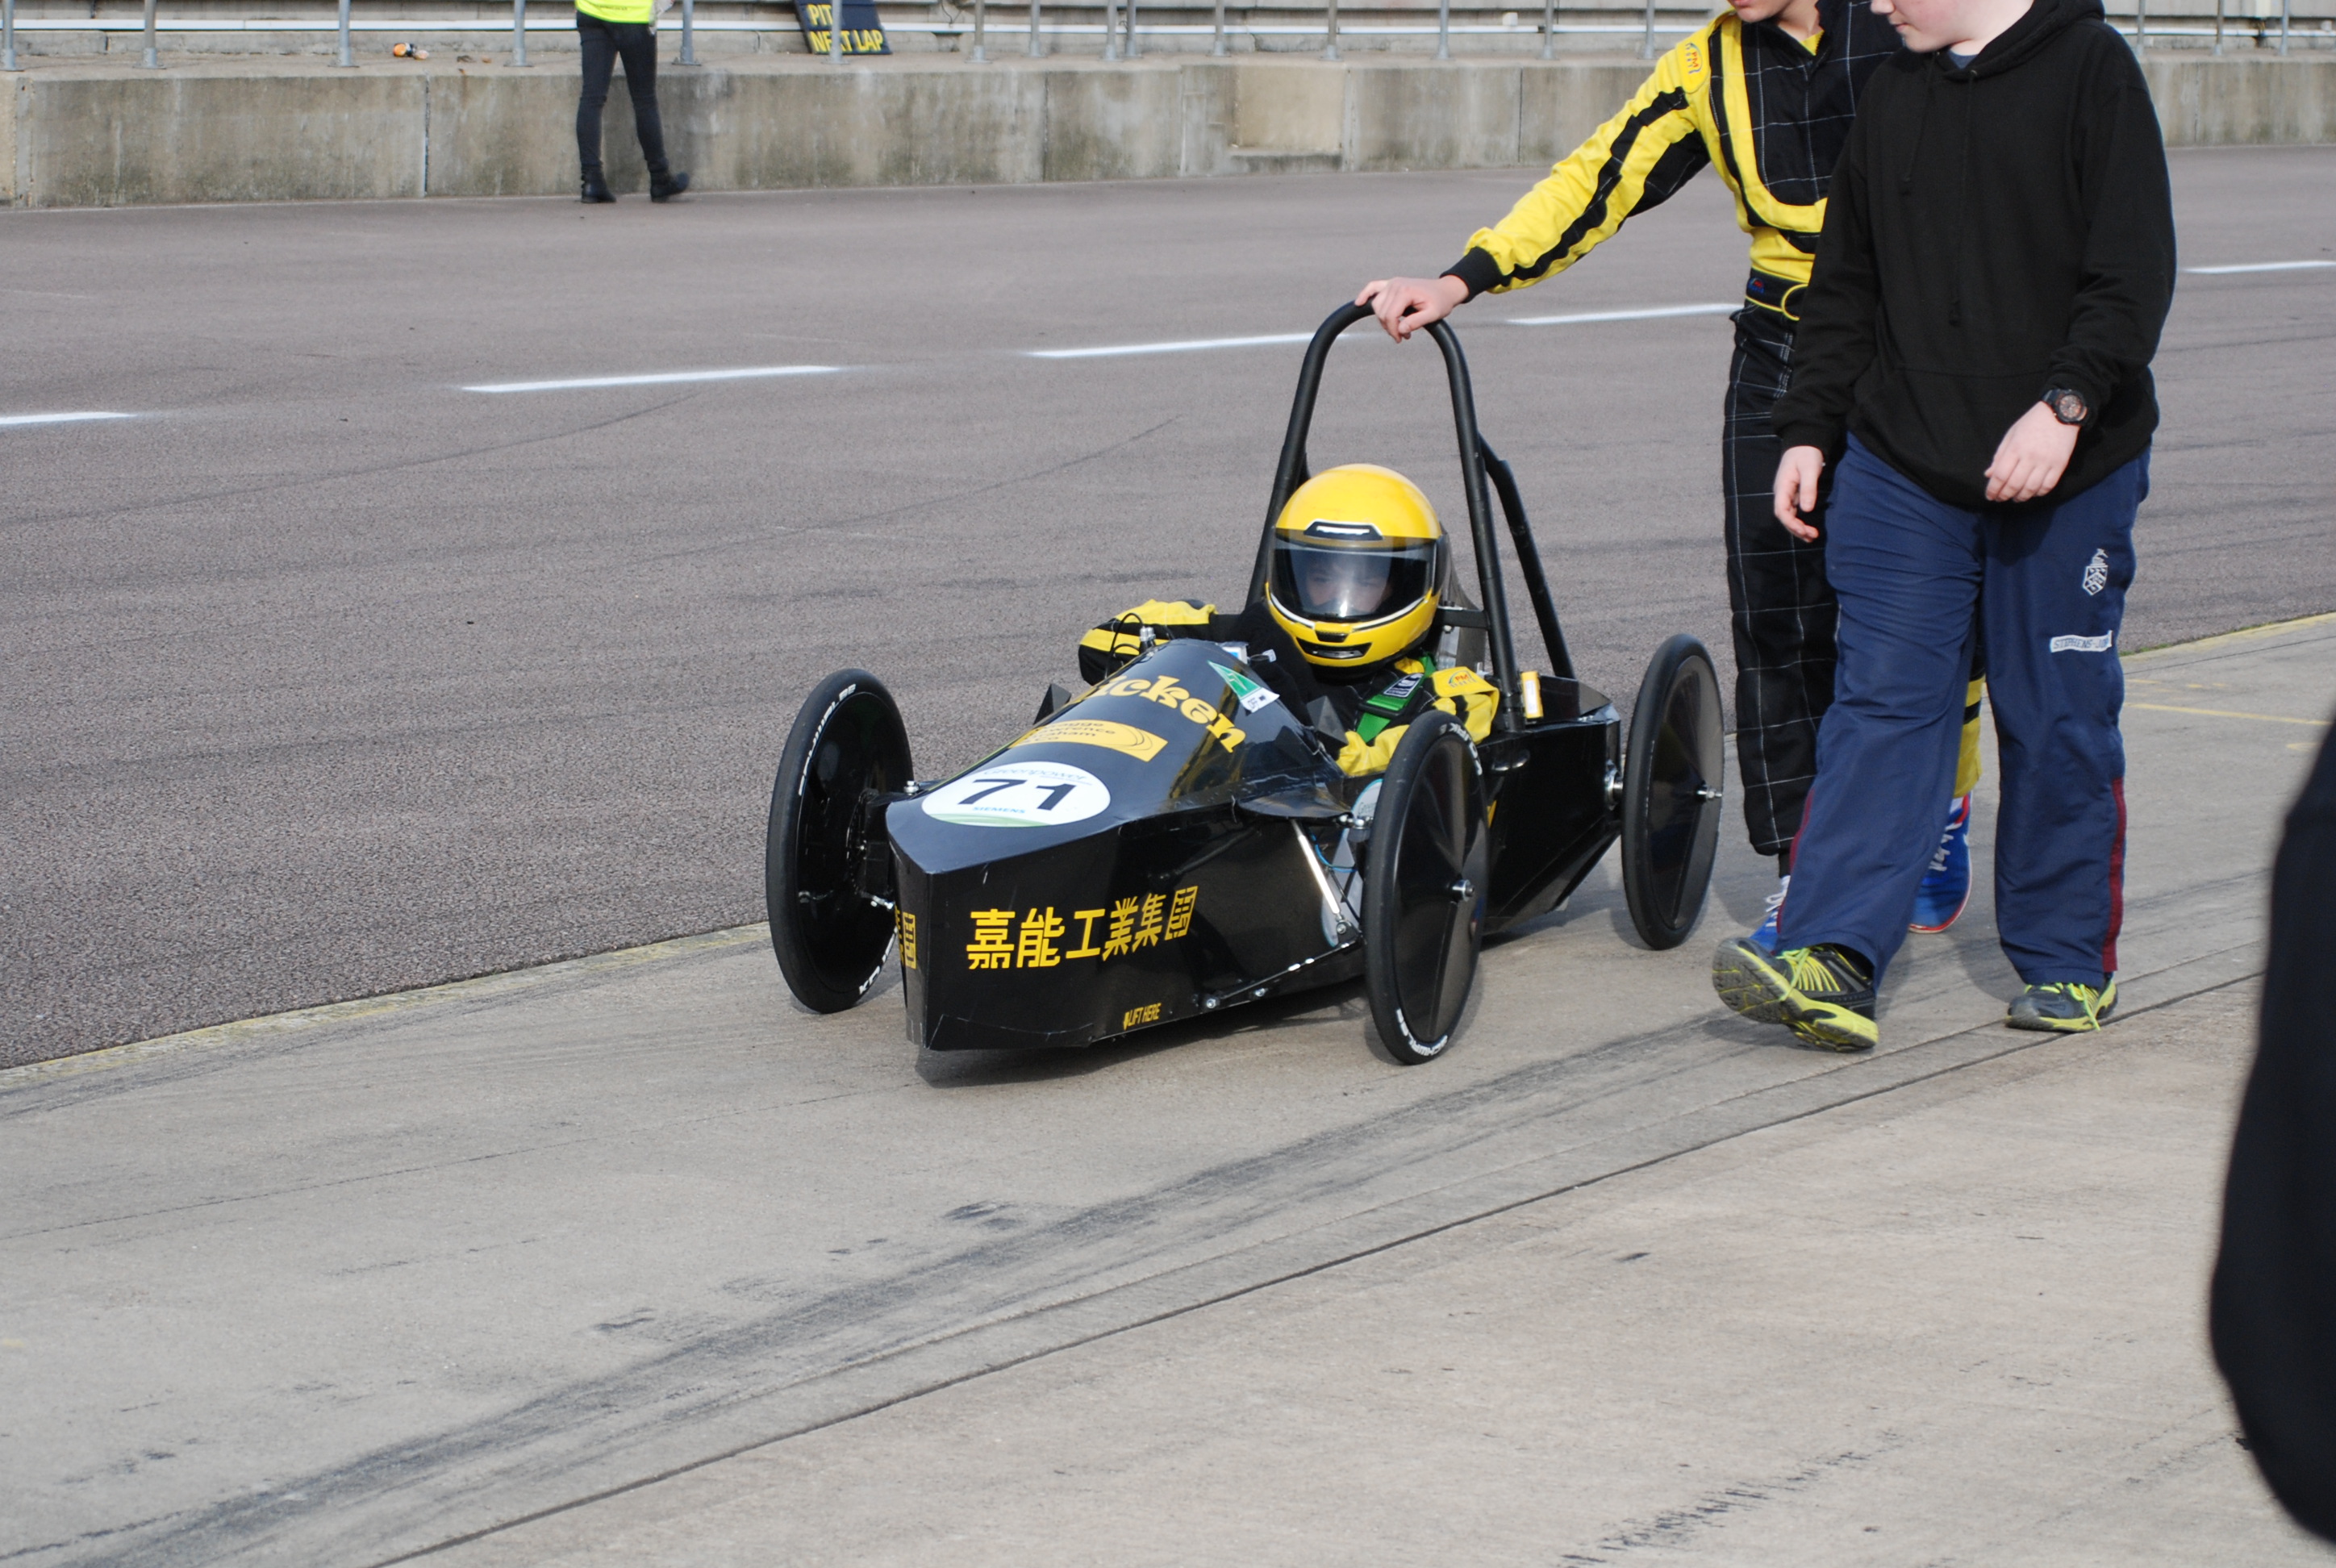 'The Chicken' Electric Car team competing at the Rockingham Finals, 10th-11th October 2015